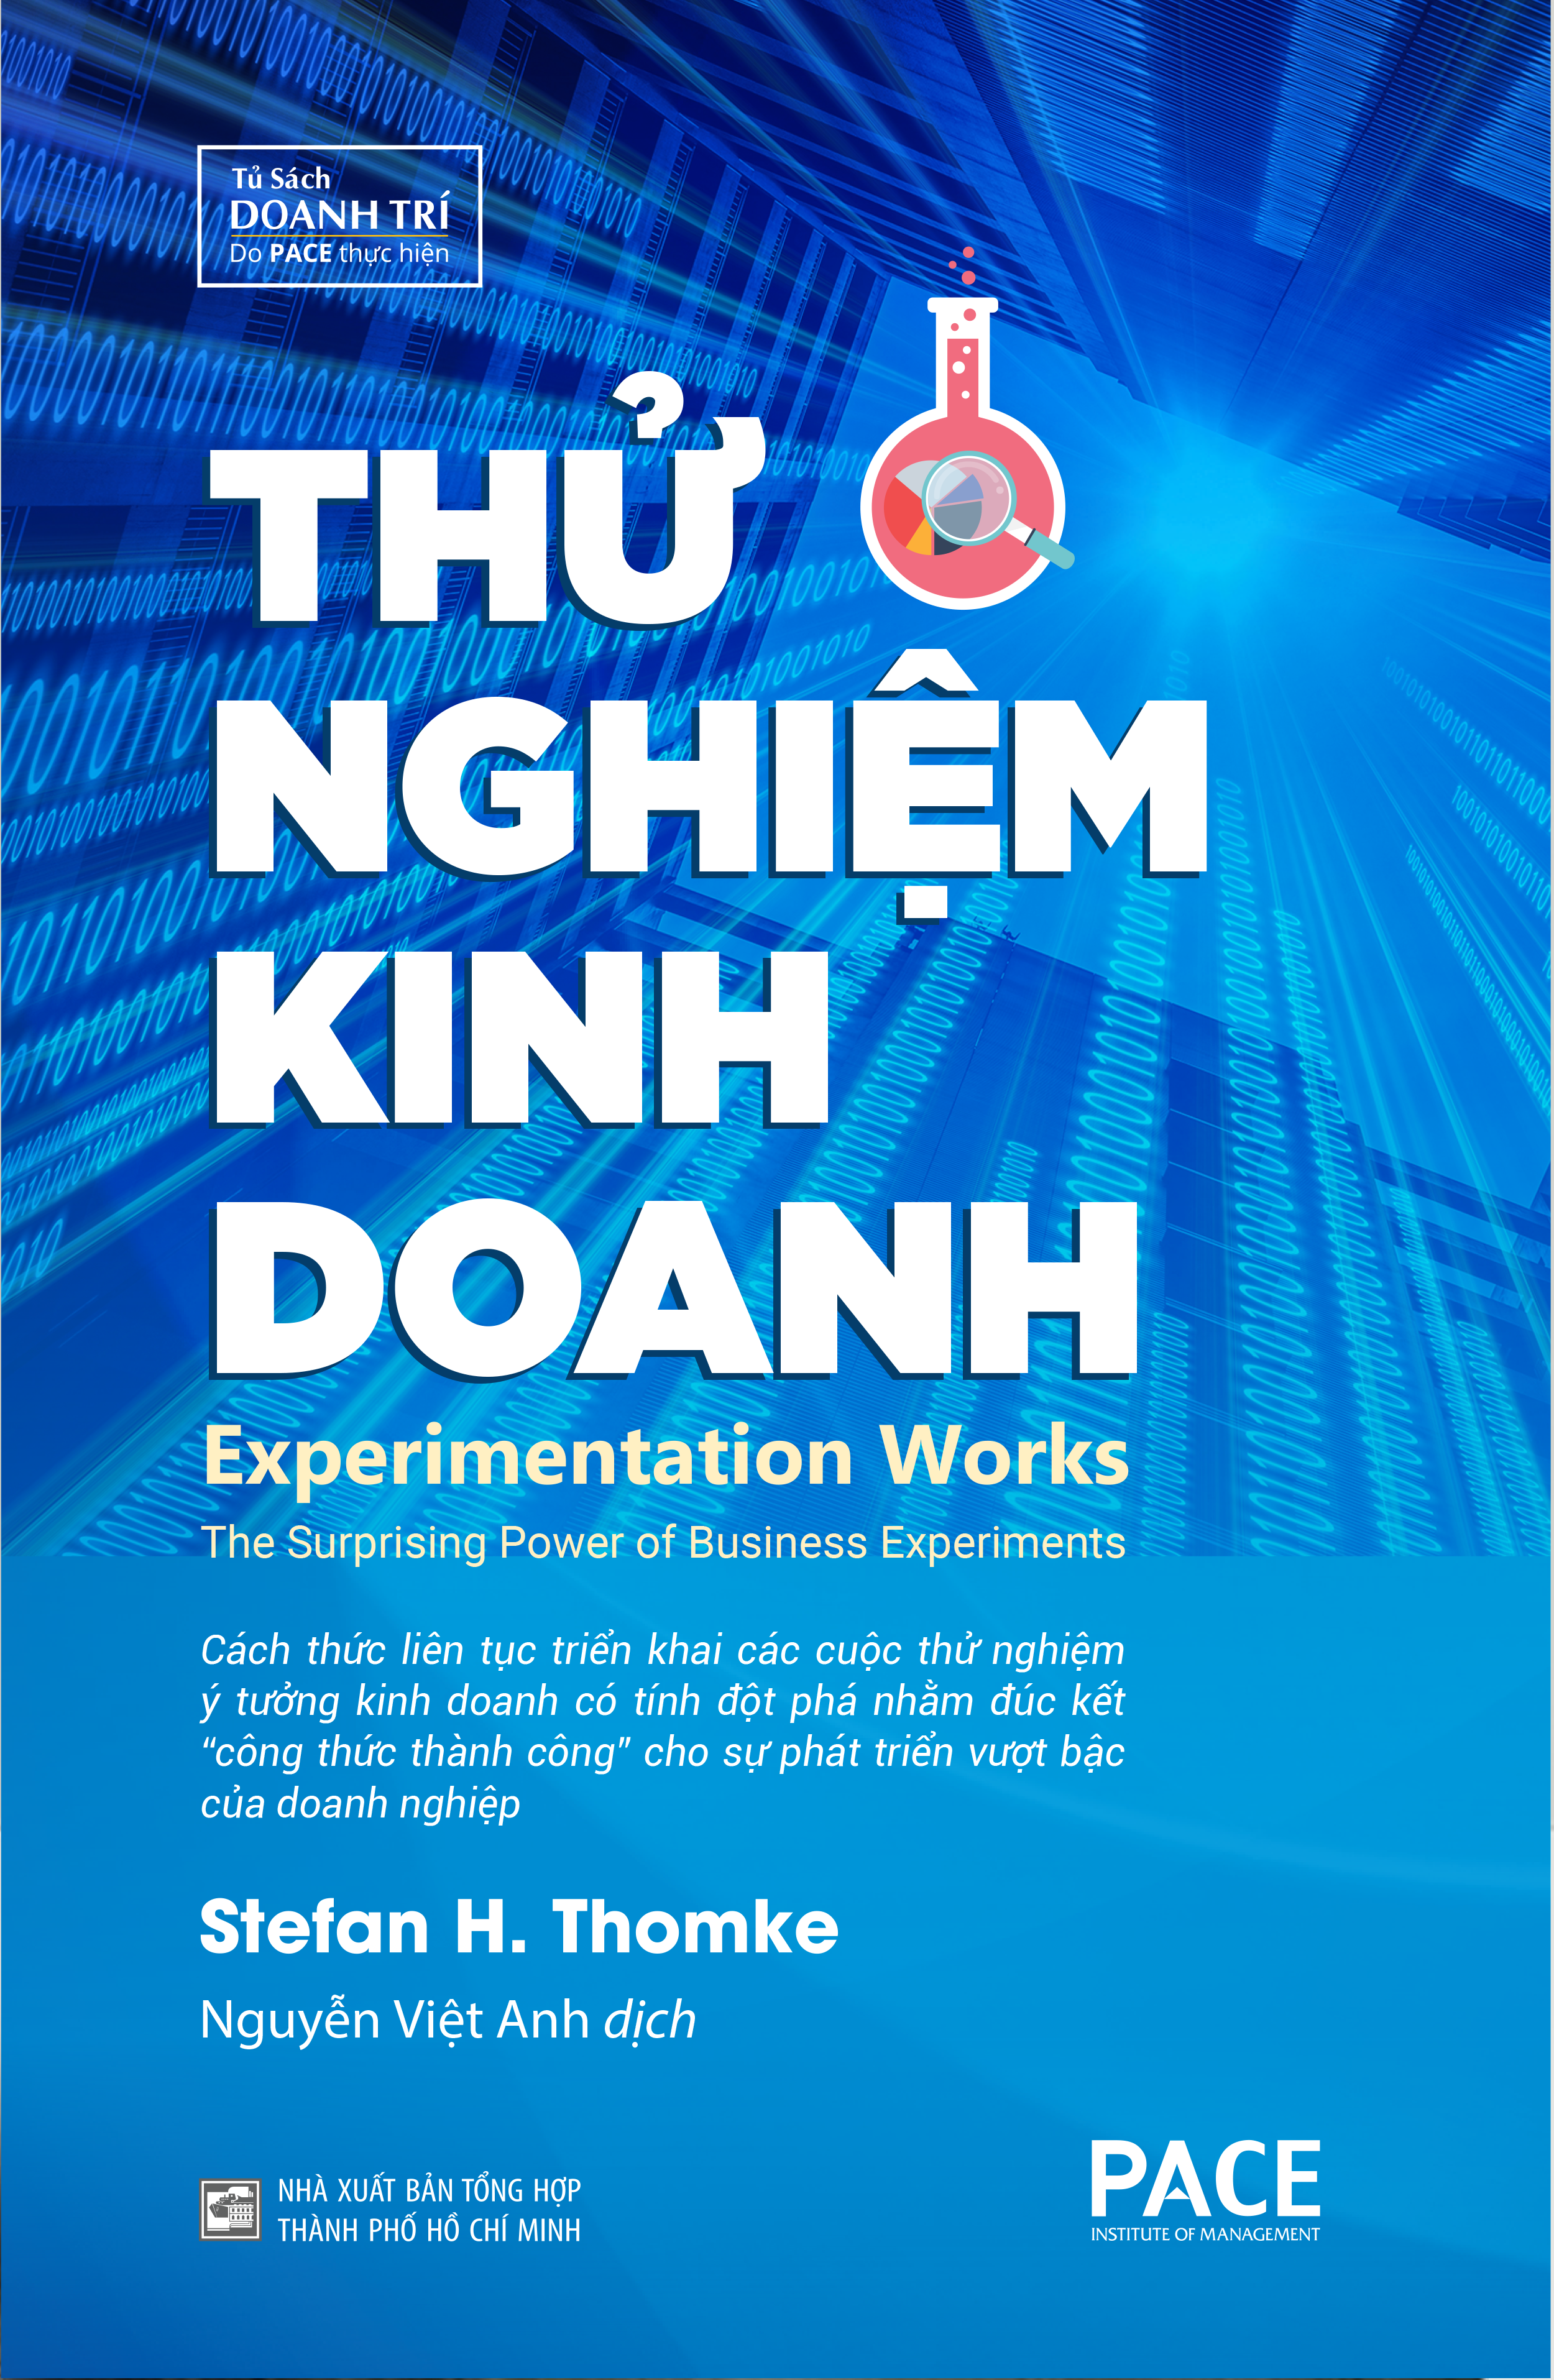 Thử Nghiệm Kinh Doanh (Experimentation Works) - Stefan H. Thomke - PACE Books